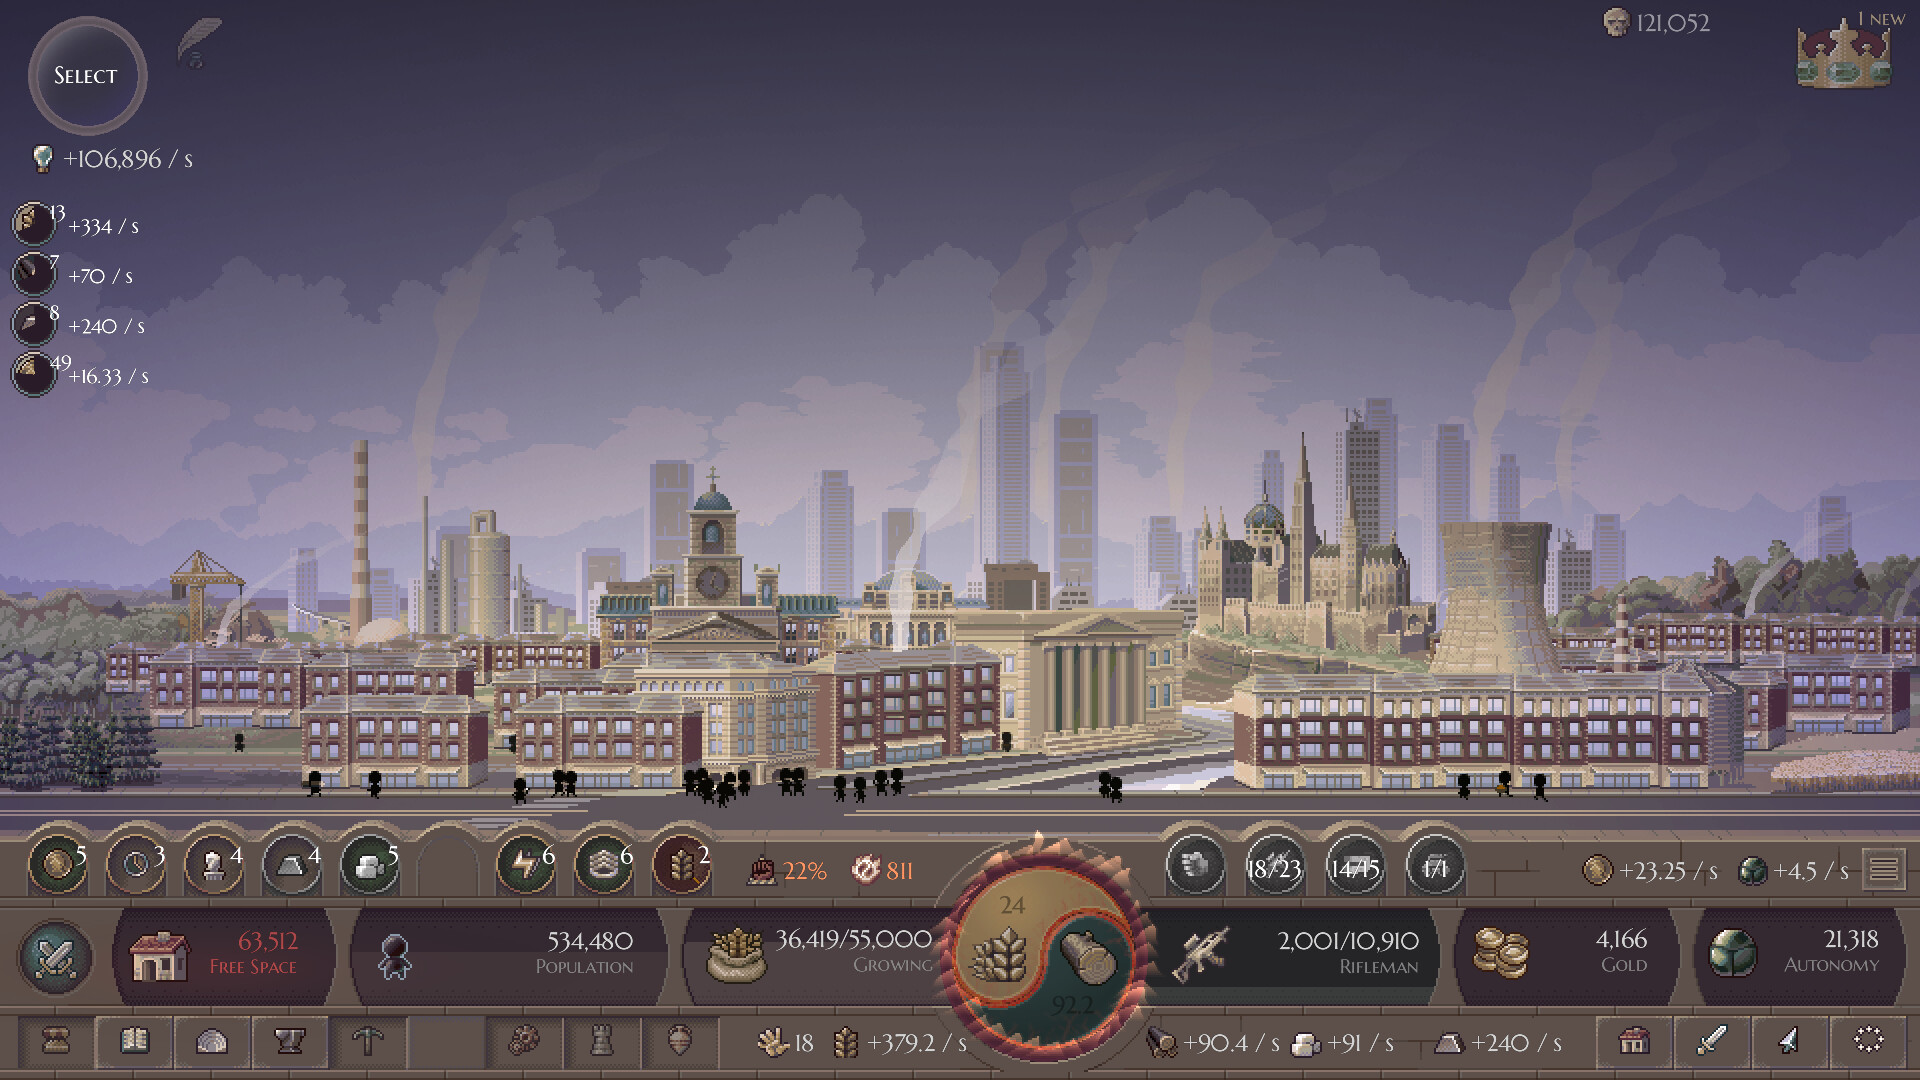 This strategy city builder clicker may be small, but it's eating up massive chunks of my time